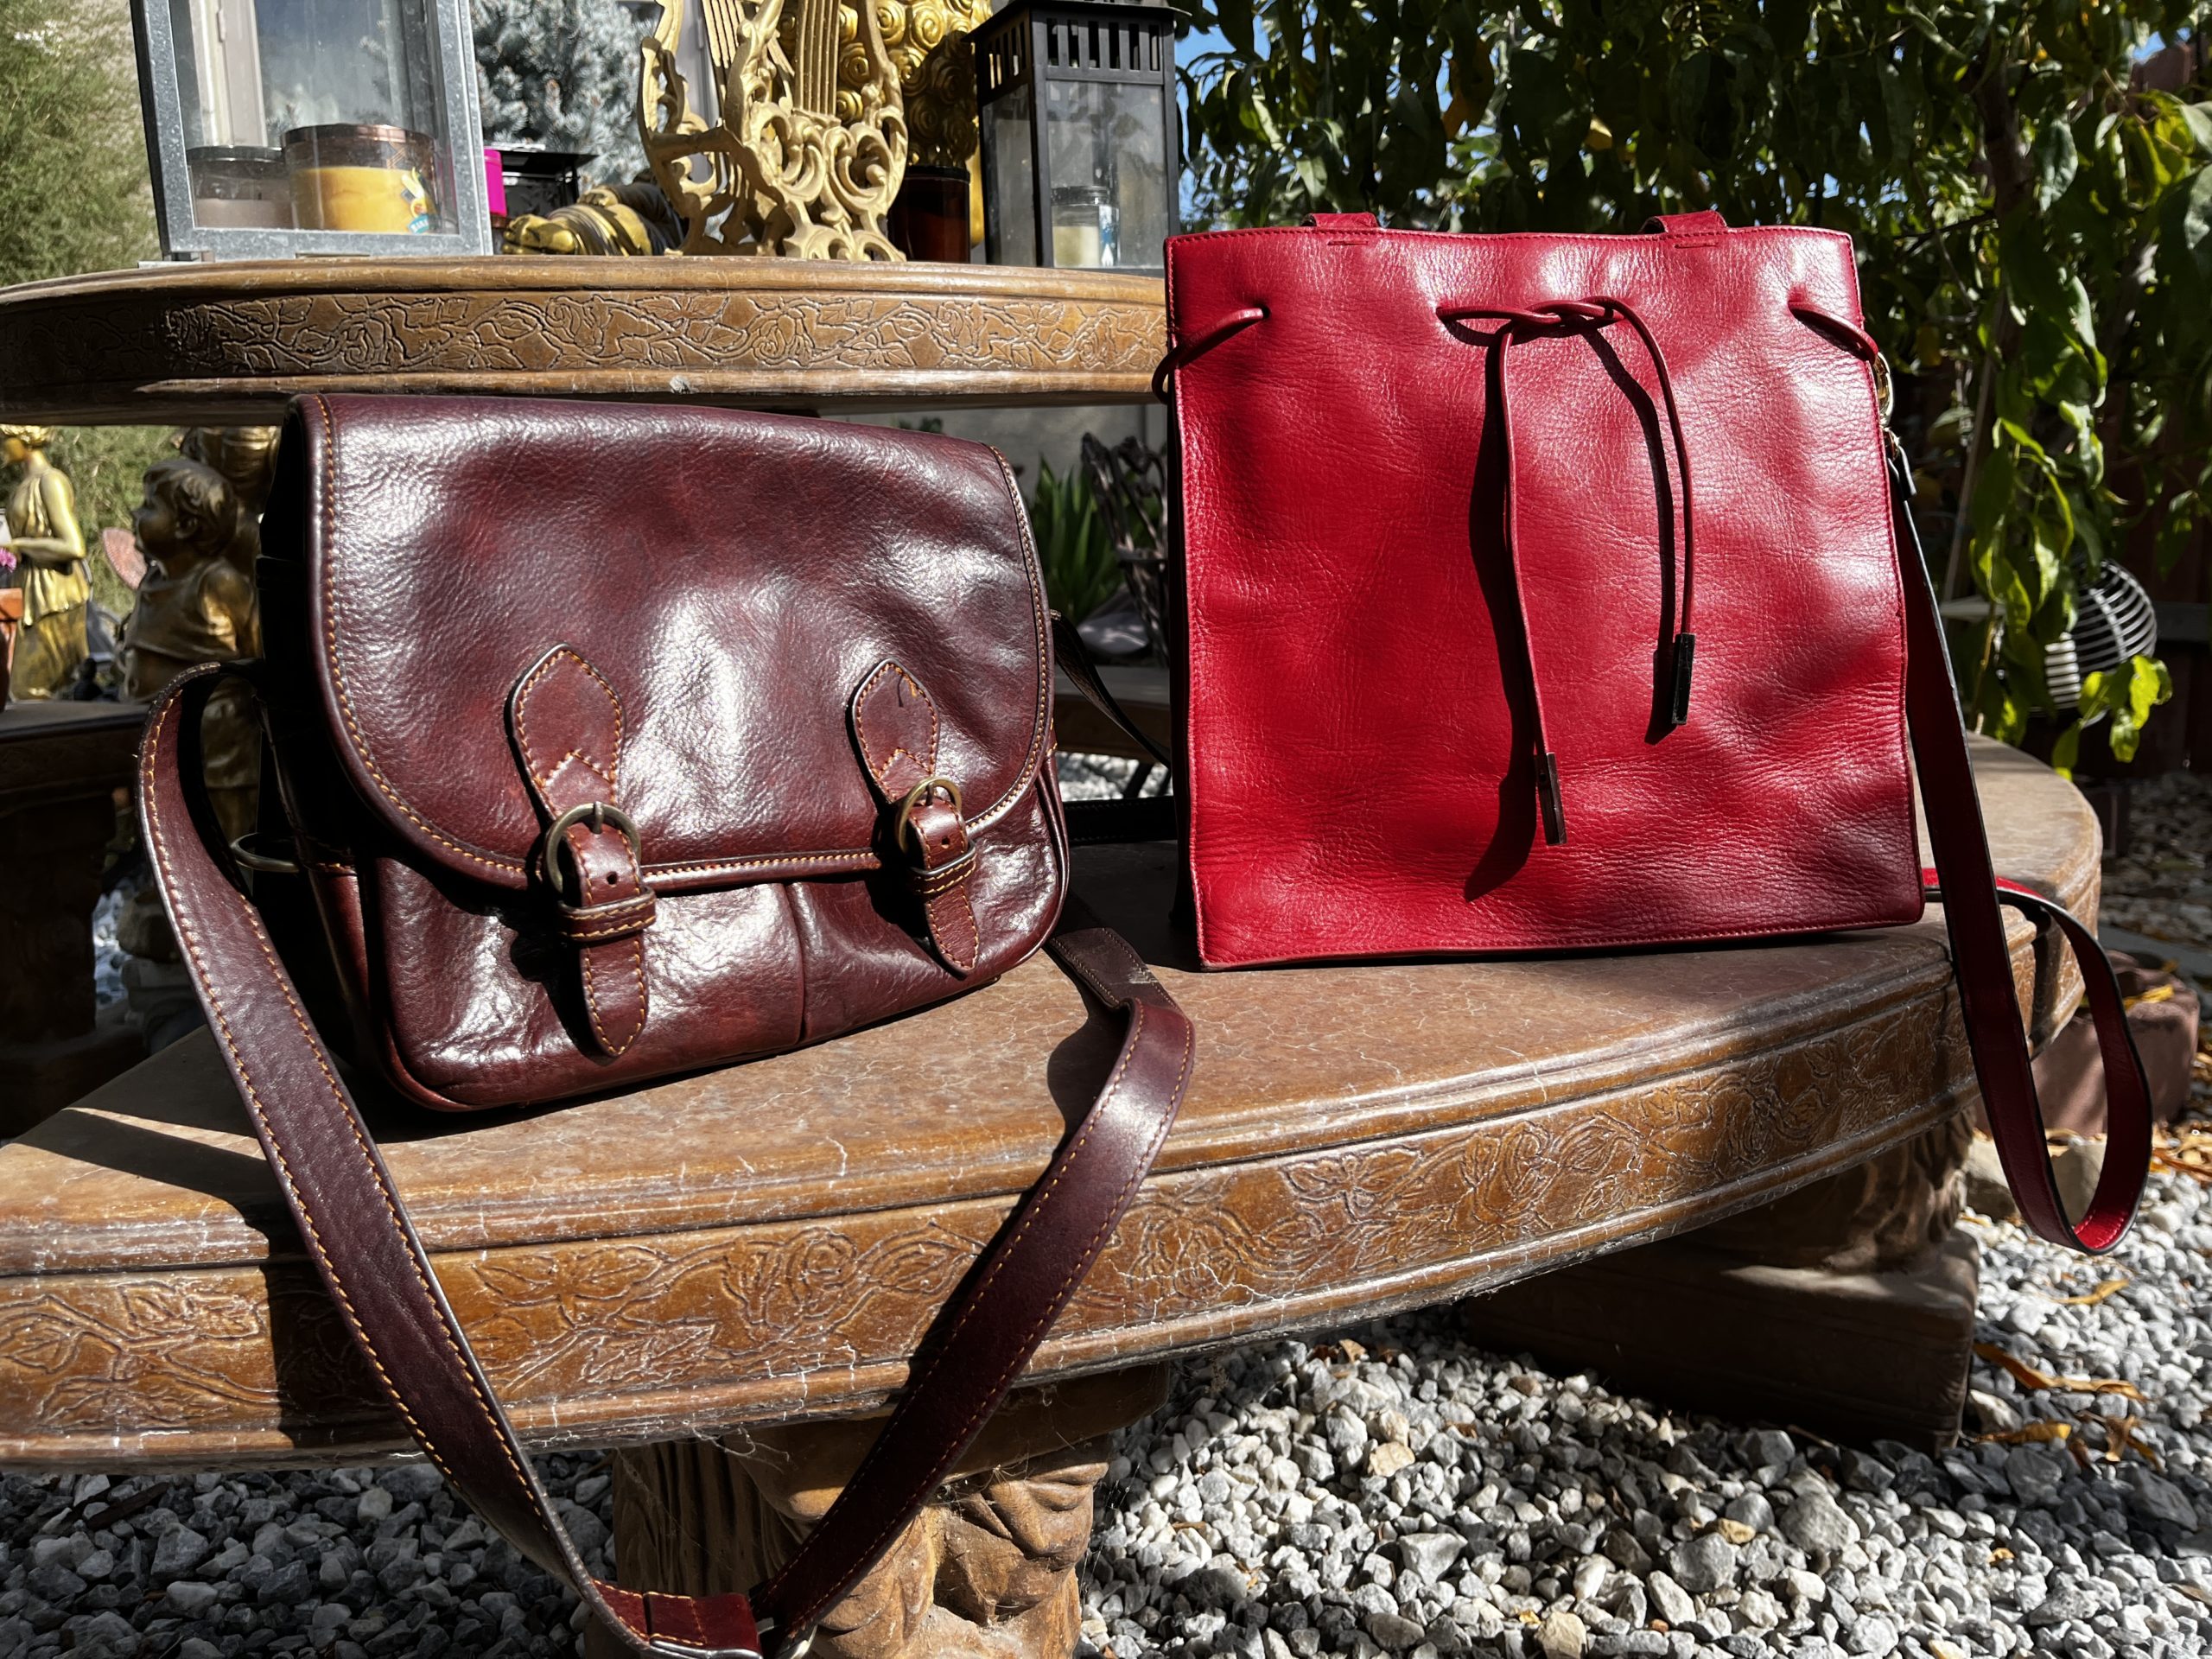 Cognac and red purse